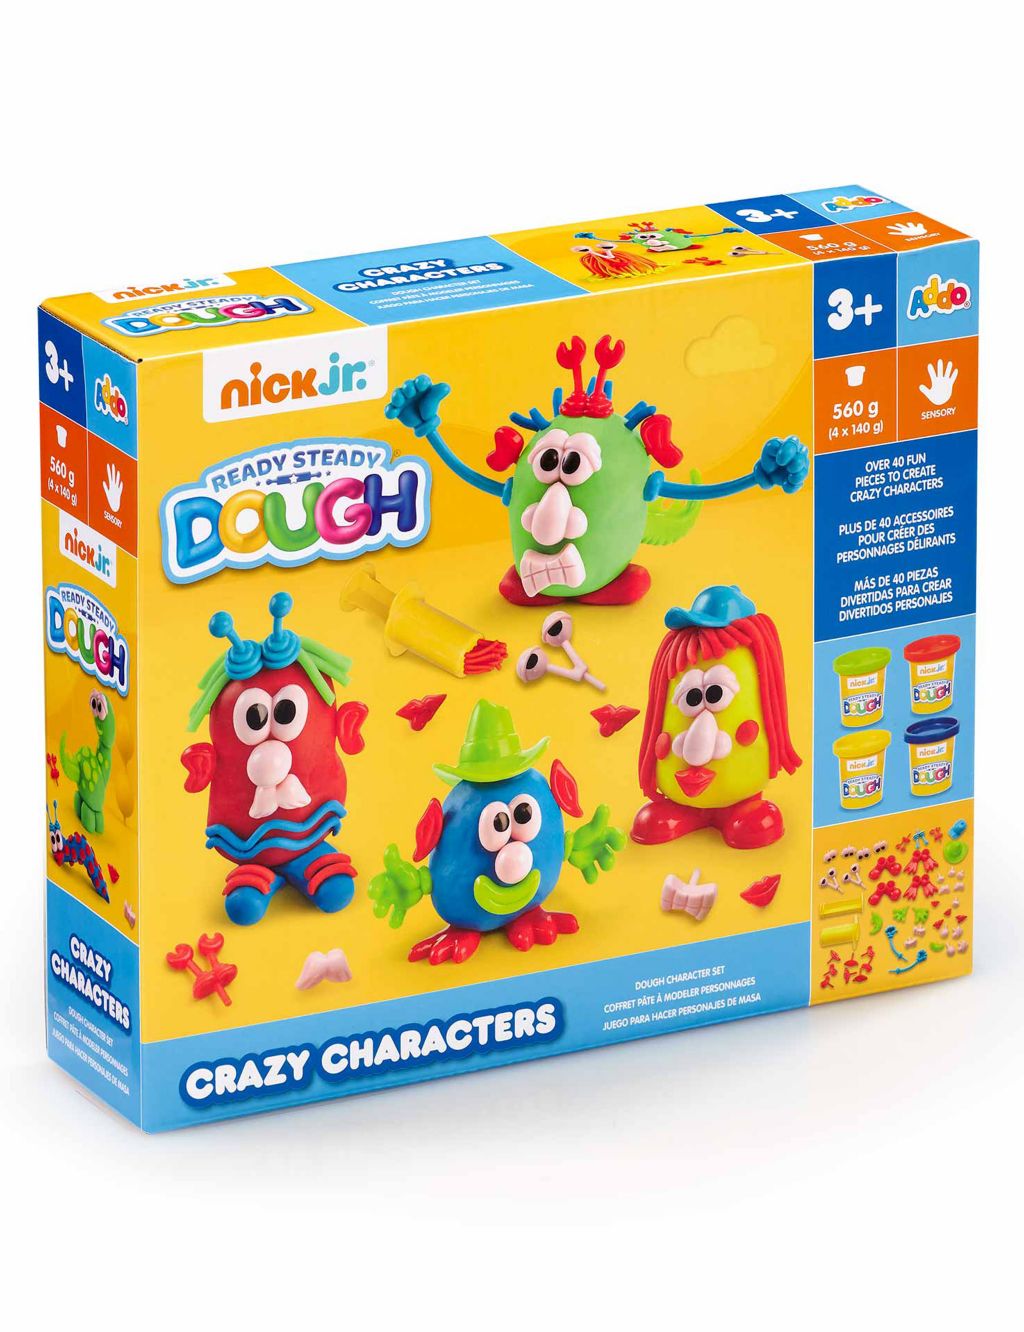 Nick Jr. Ready Steady Dough Crazy Characters Playset (3+ Yrs) image 6